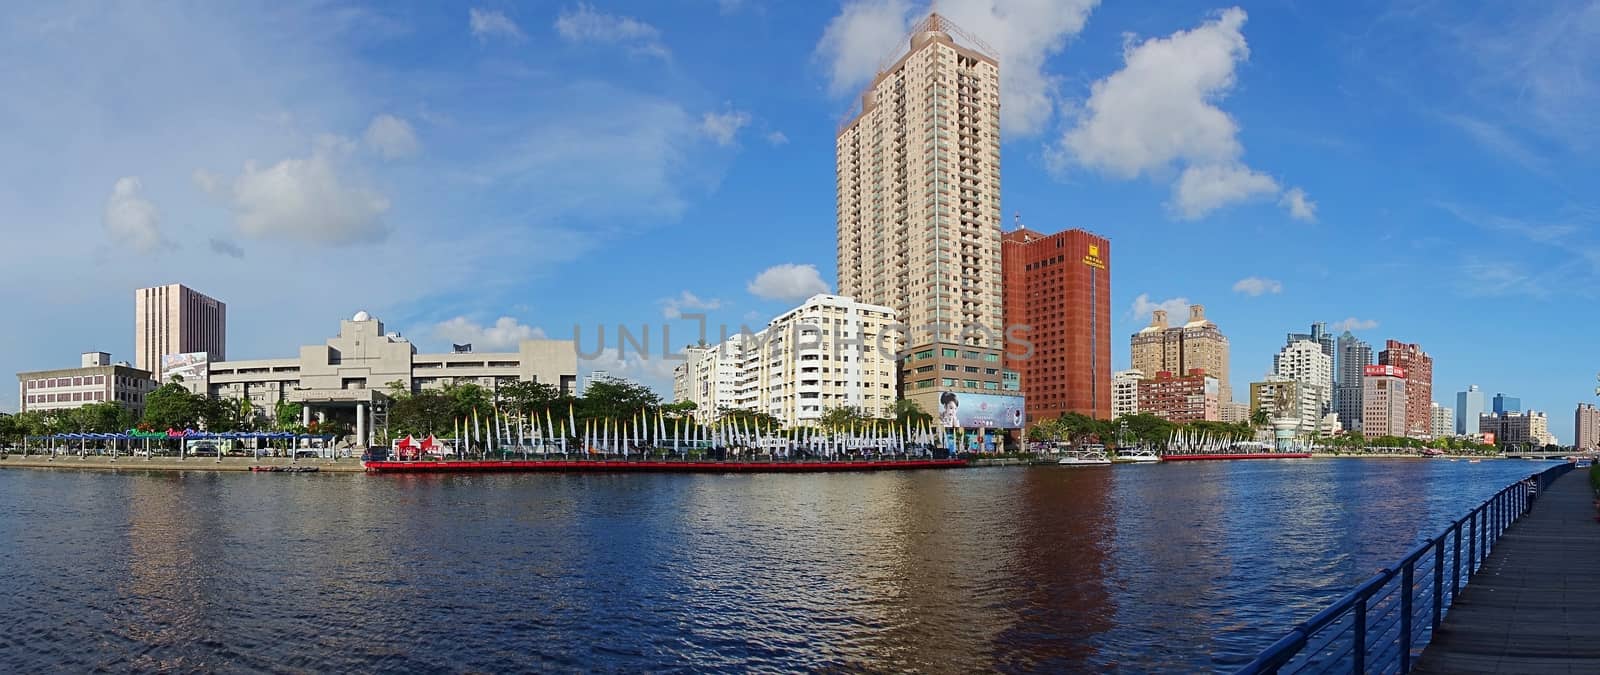 KAOHSIUNG, TAIWAN -- JUNE 14, 2015: A panoramic view of the Love River in downtown Kaohsiung city on a clear summer day.